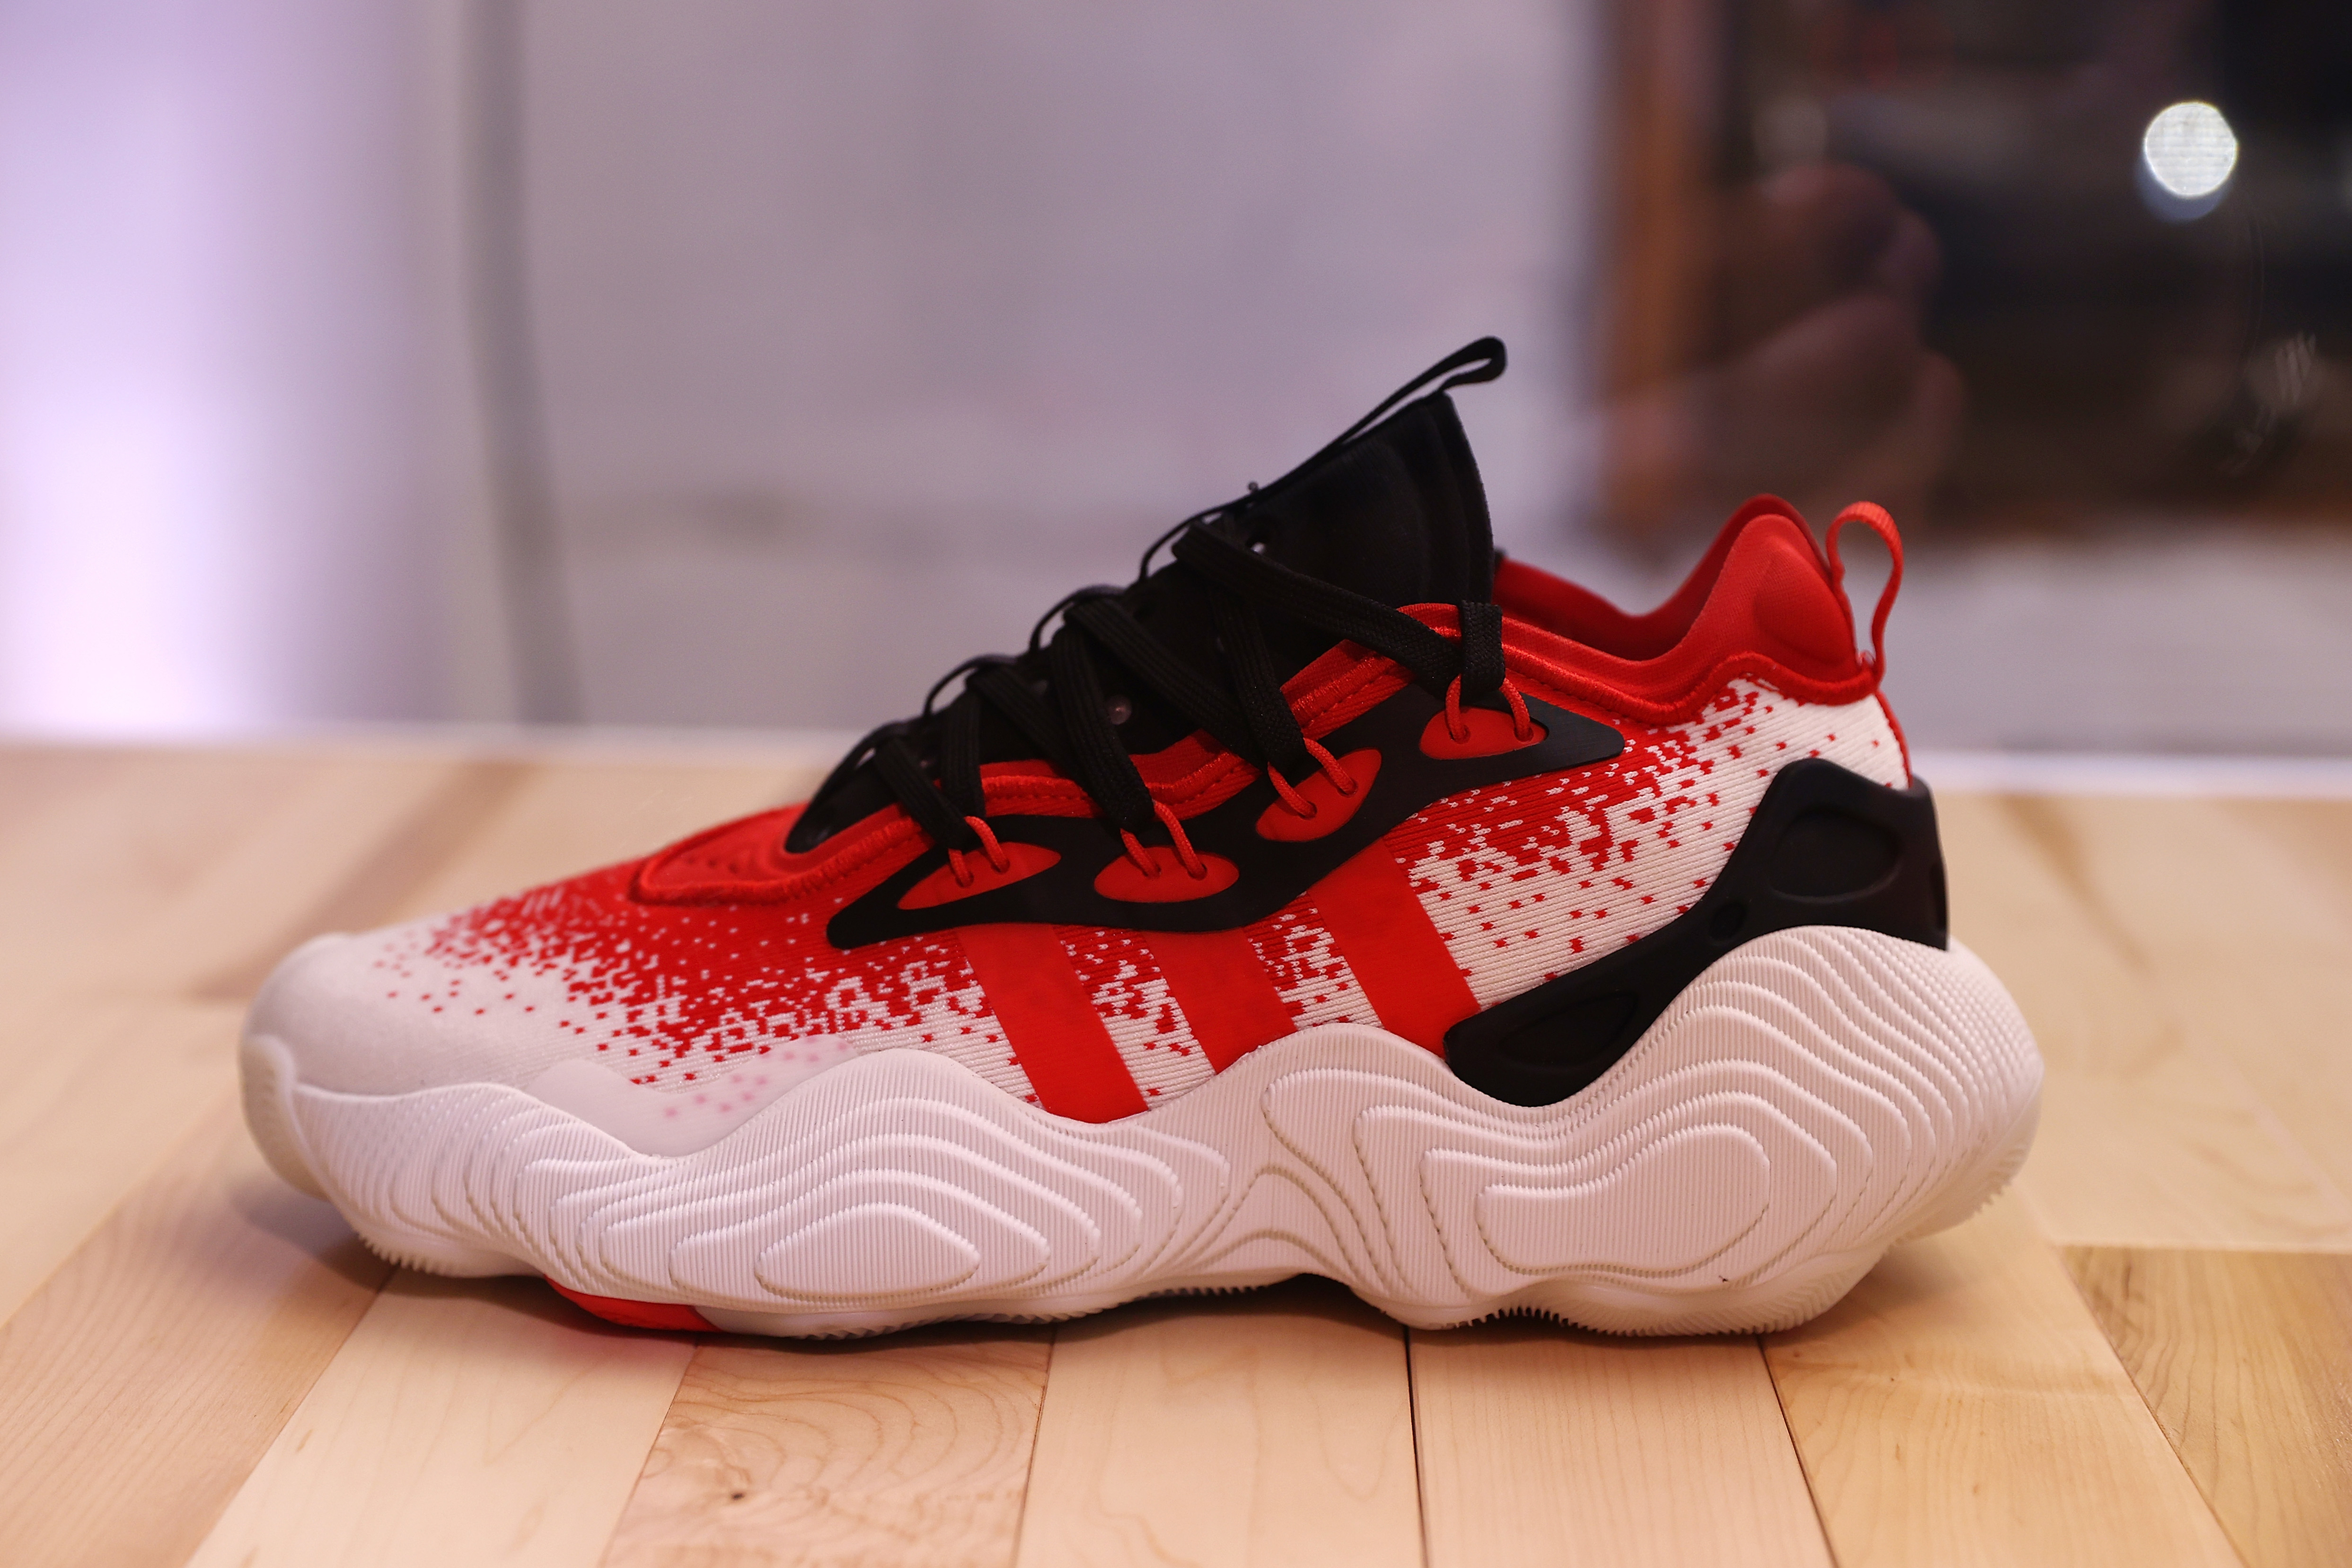 A single white and red splattered sport shoe on a wooden surface